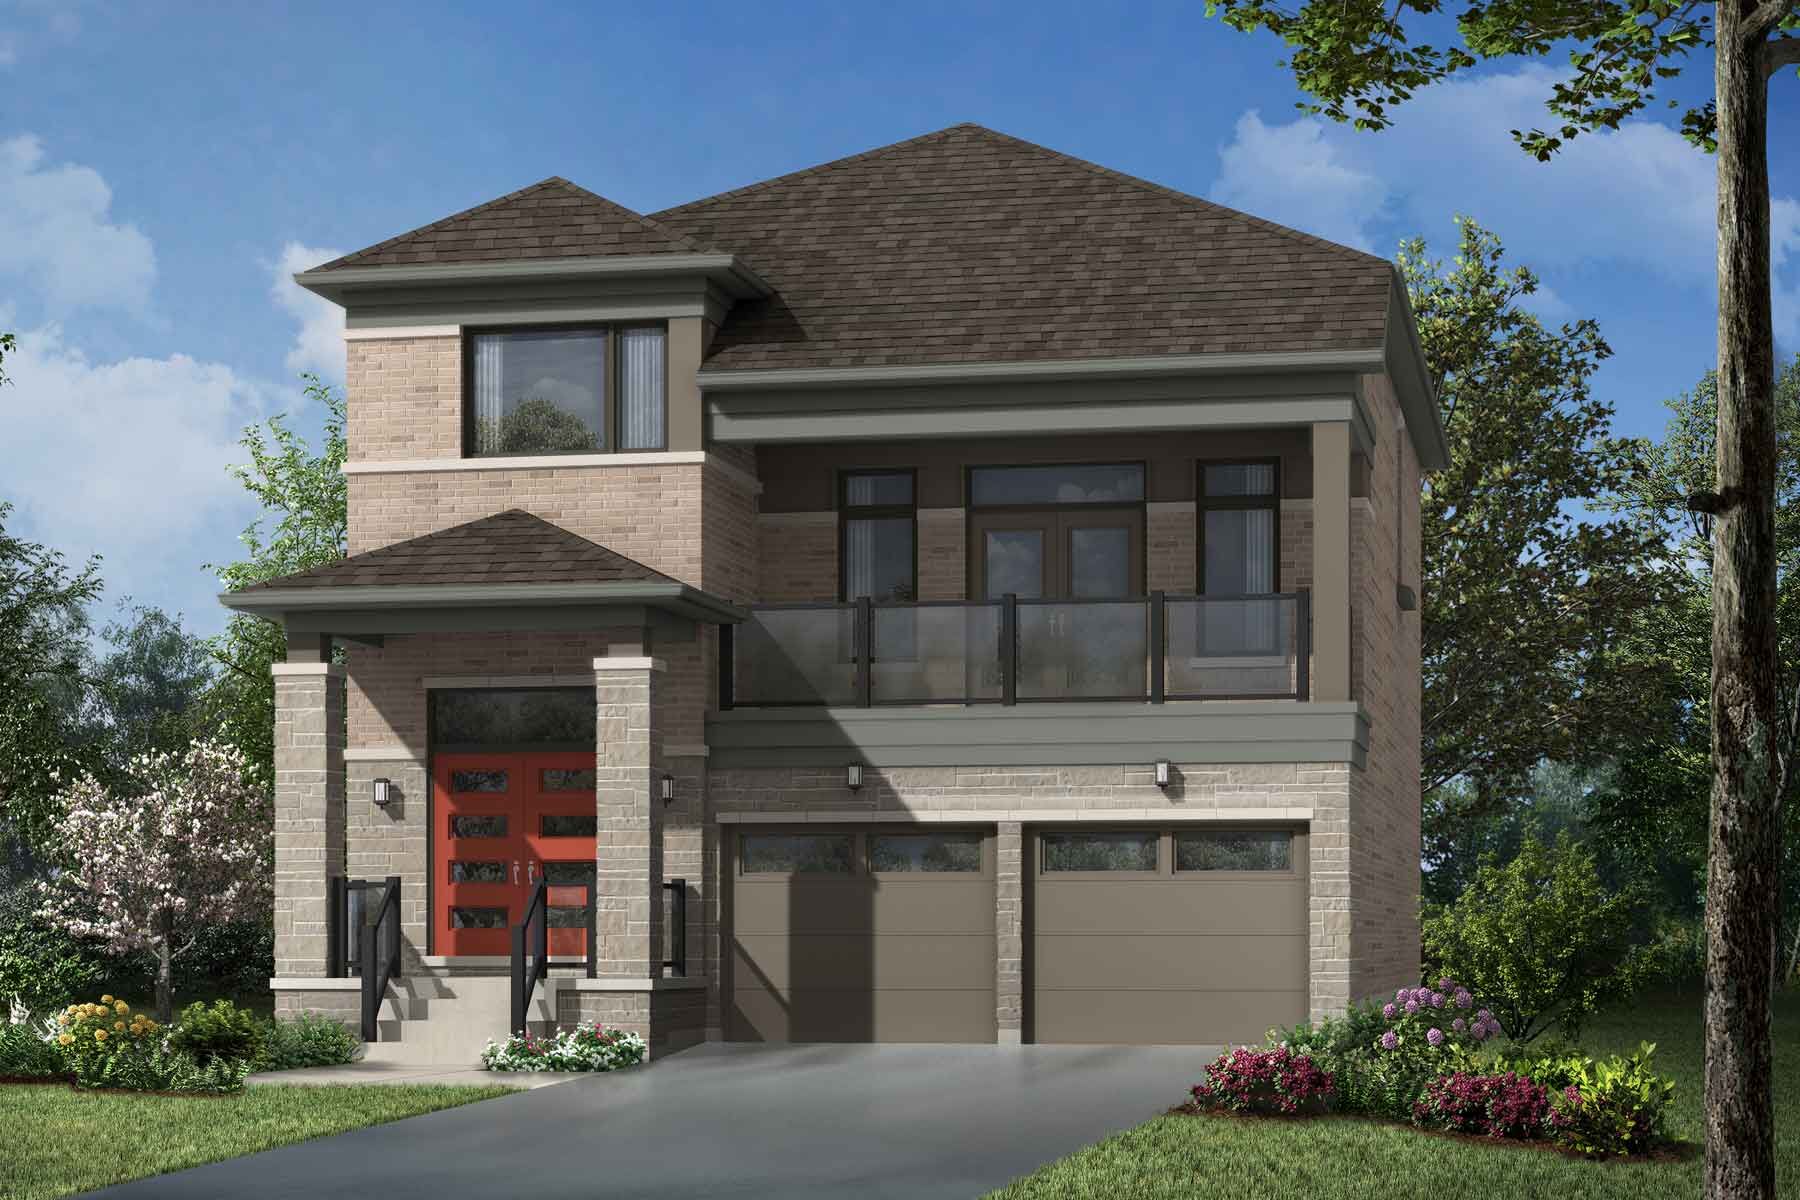 A Modern style single family home with a double car garage.